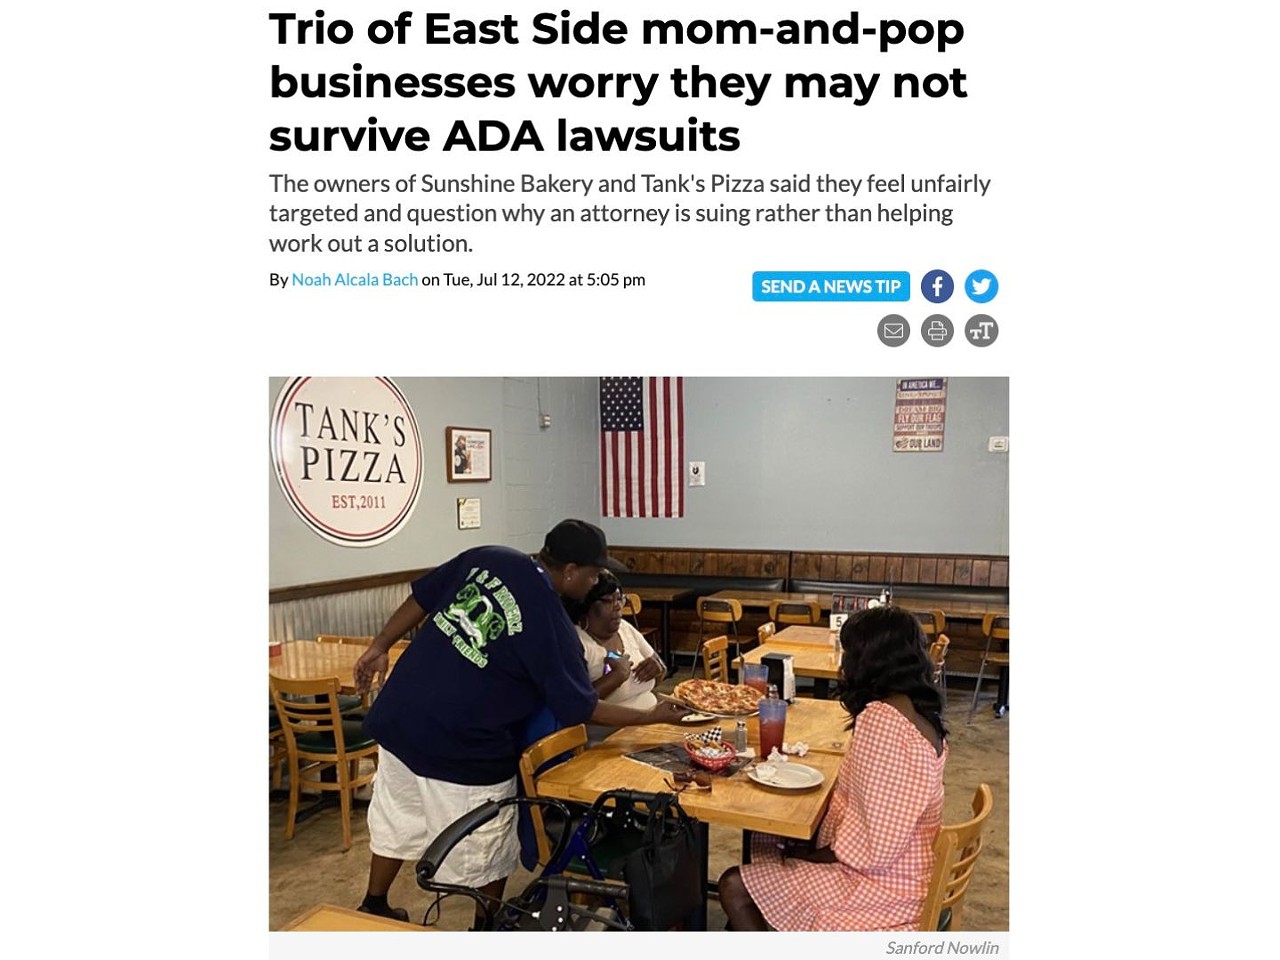 13. Trio of East Side mom-and-pop businesses worry they may not survive ADA lawsuits